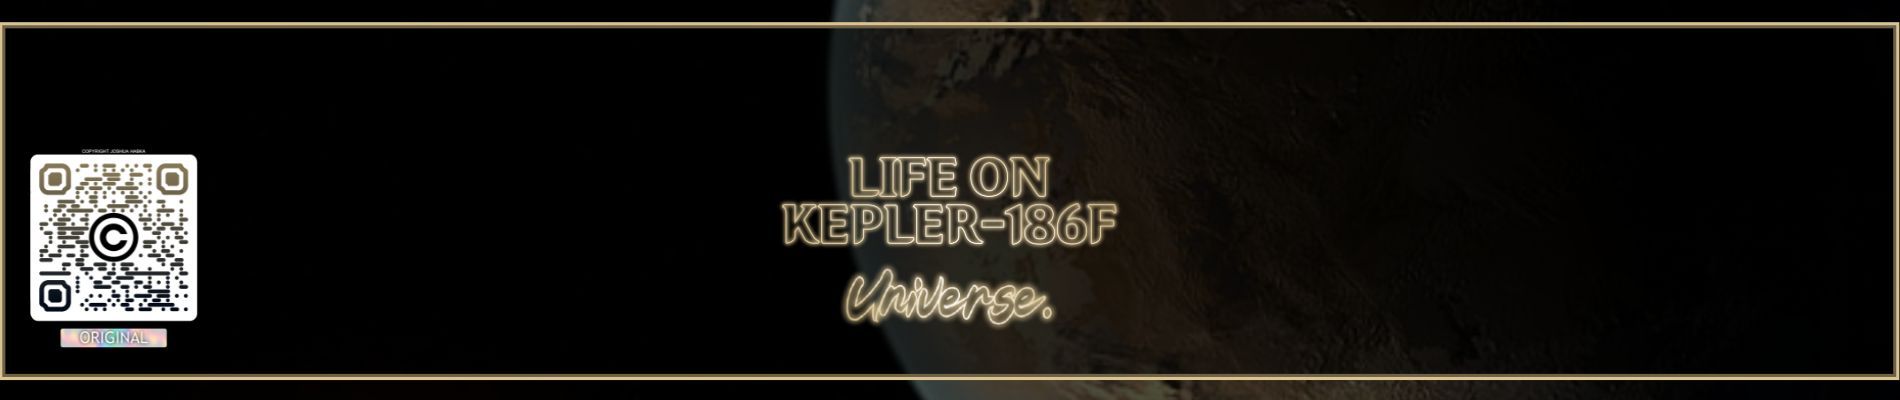 Is There Life On Kepler-186f?